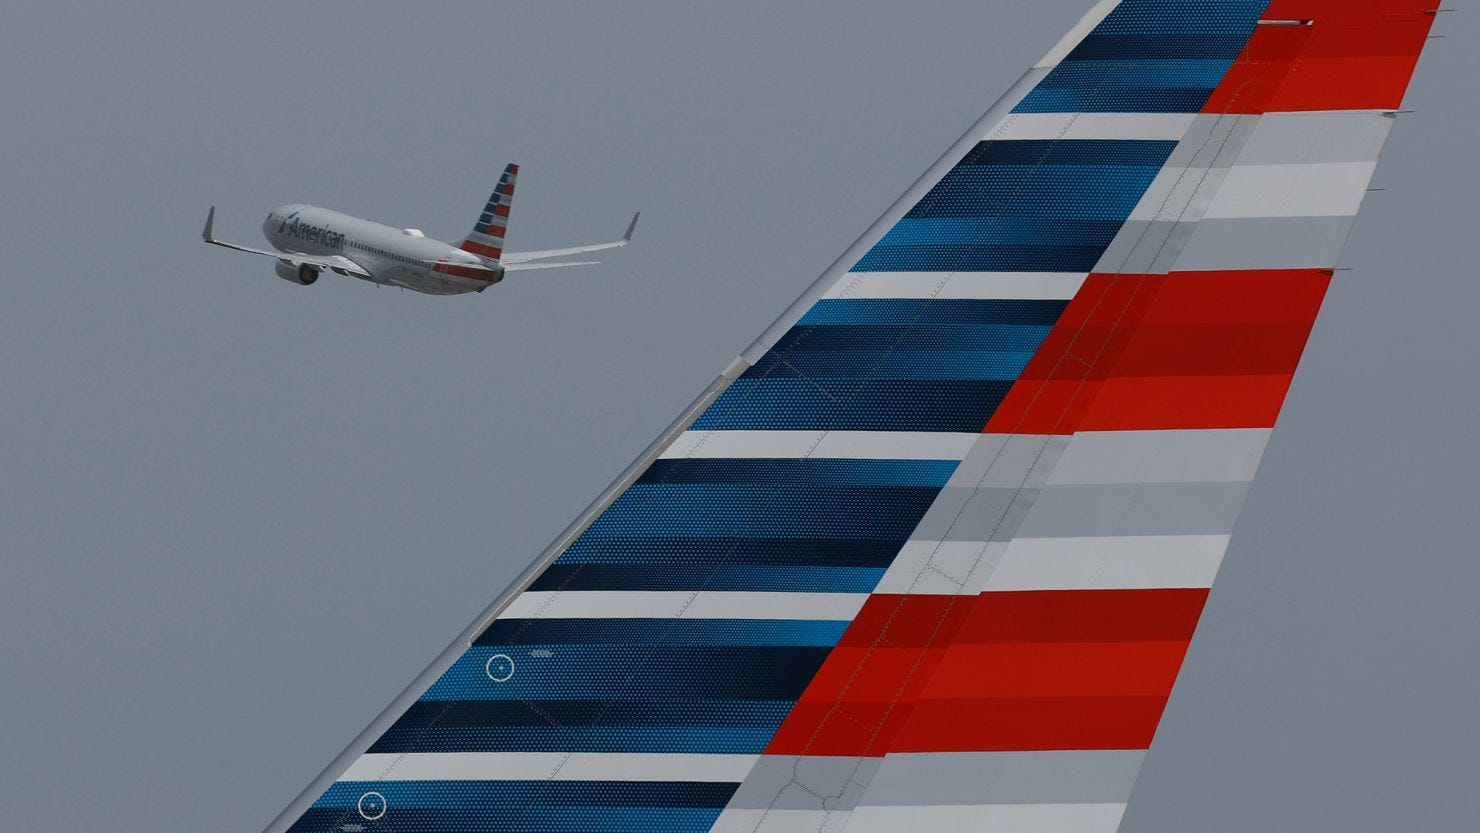 What’s going on with American Airlines Pilots- Safety Concern report